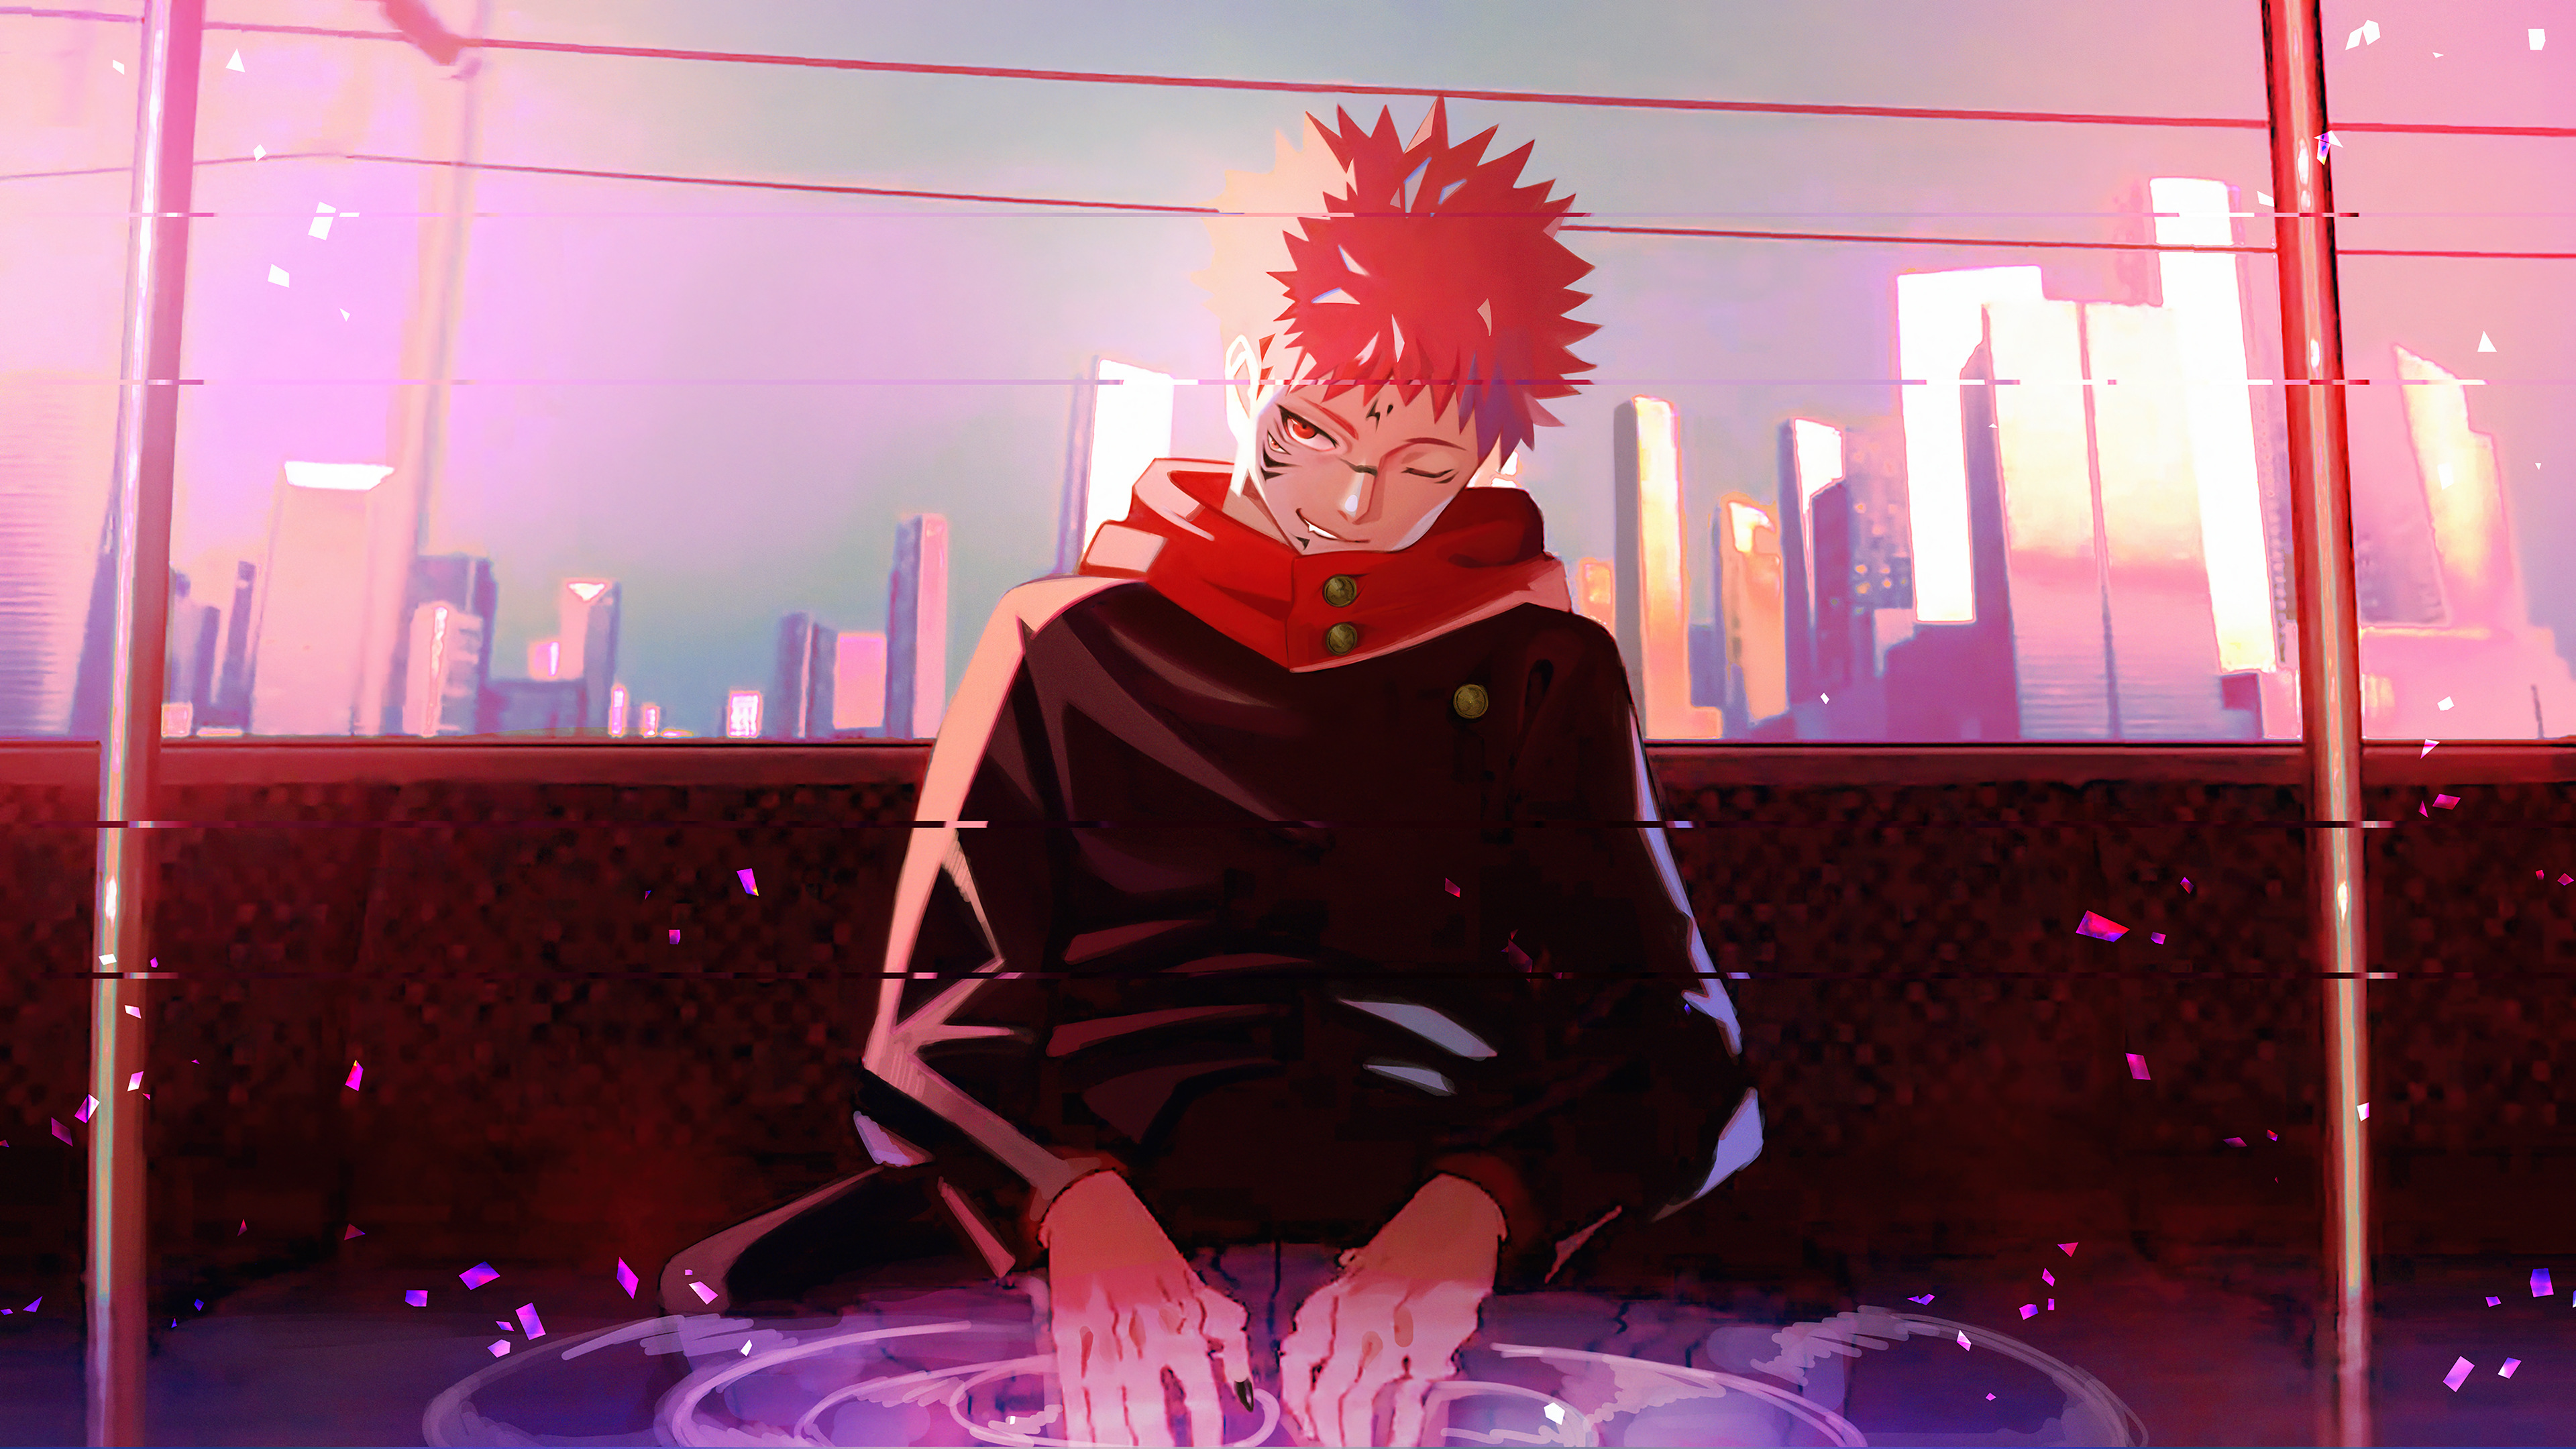 1200+ Jujutsu Kaisen Hd Wallpapers And Backgrounds